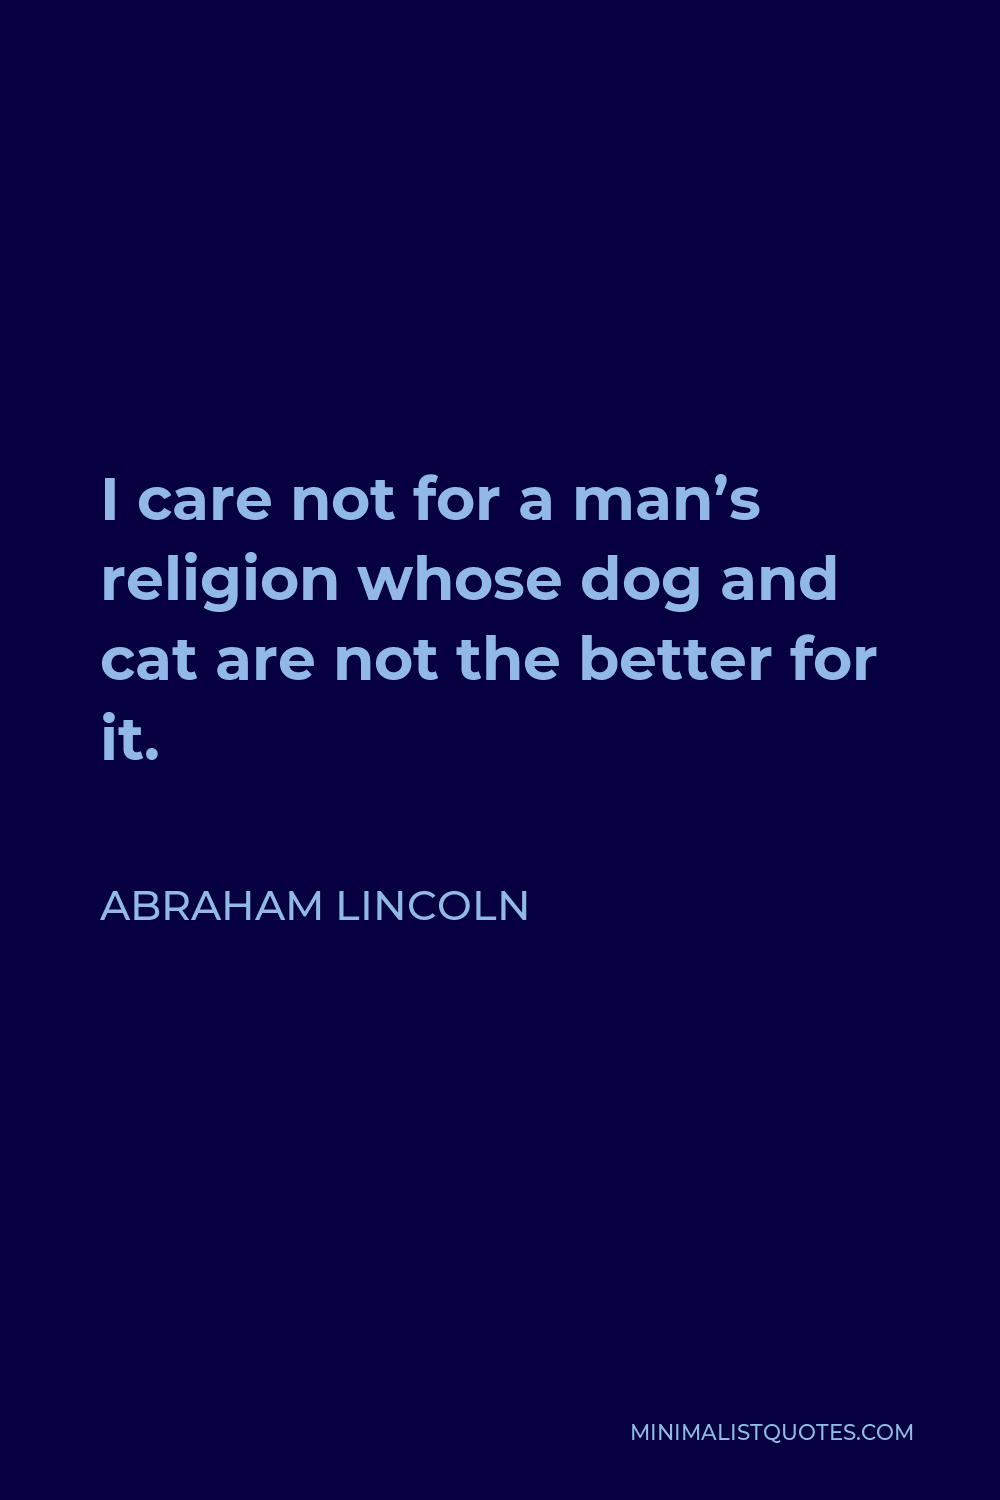 Abraham Lincoln Quote - I care not for a man’s religion whose dog and cat are not the better for it.